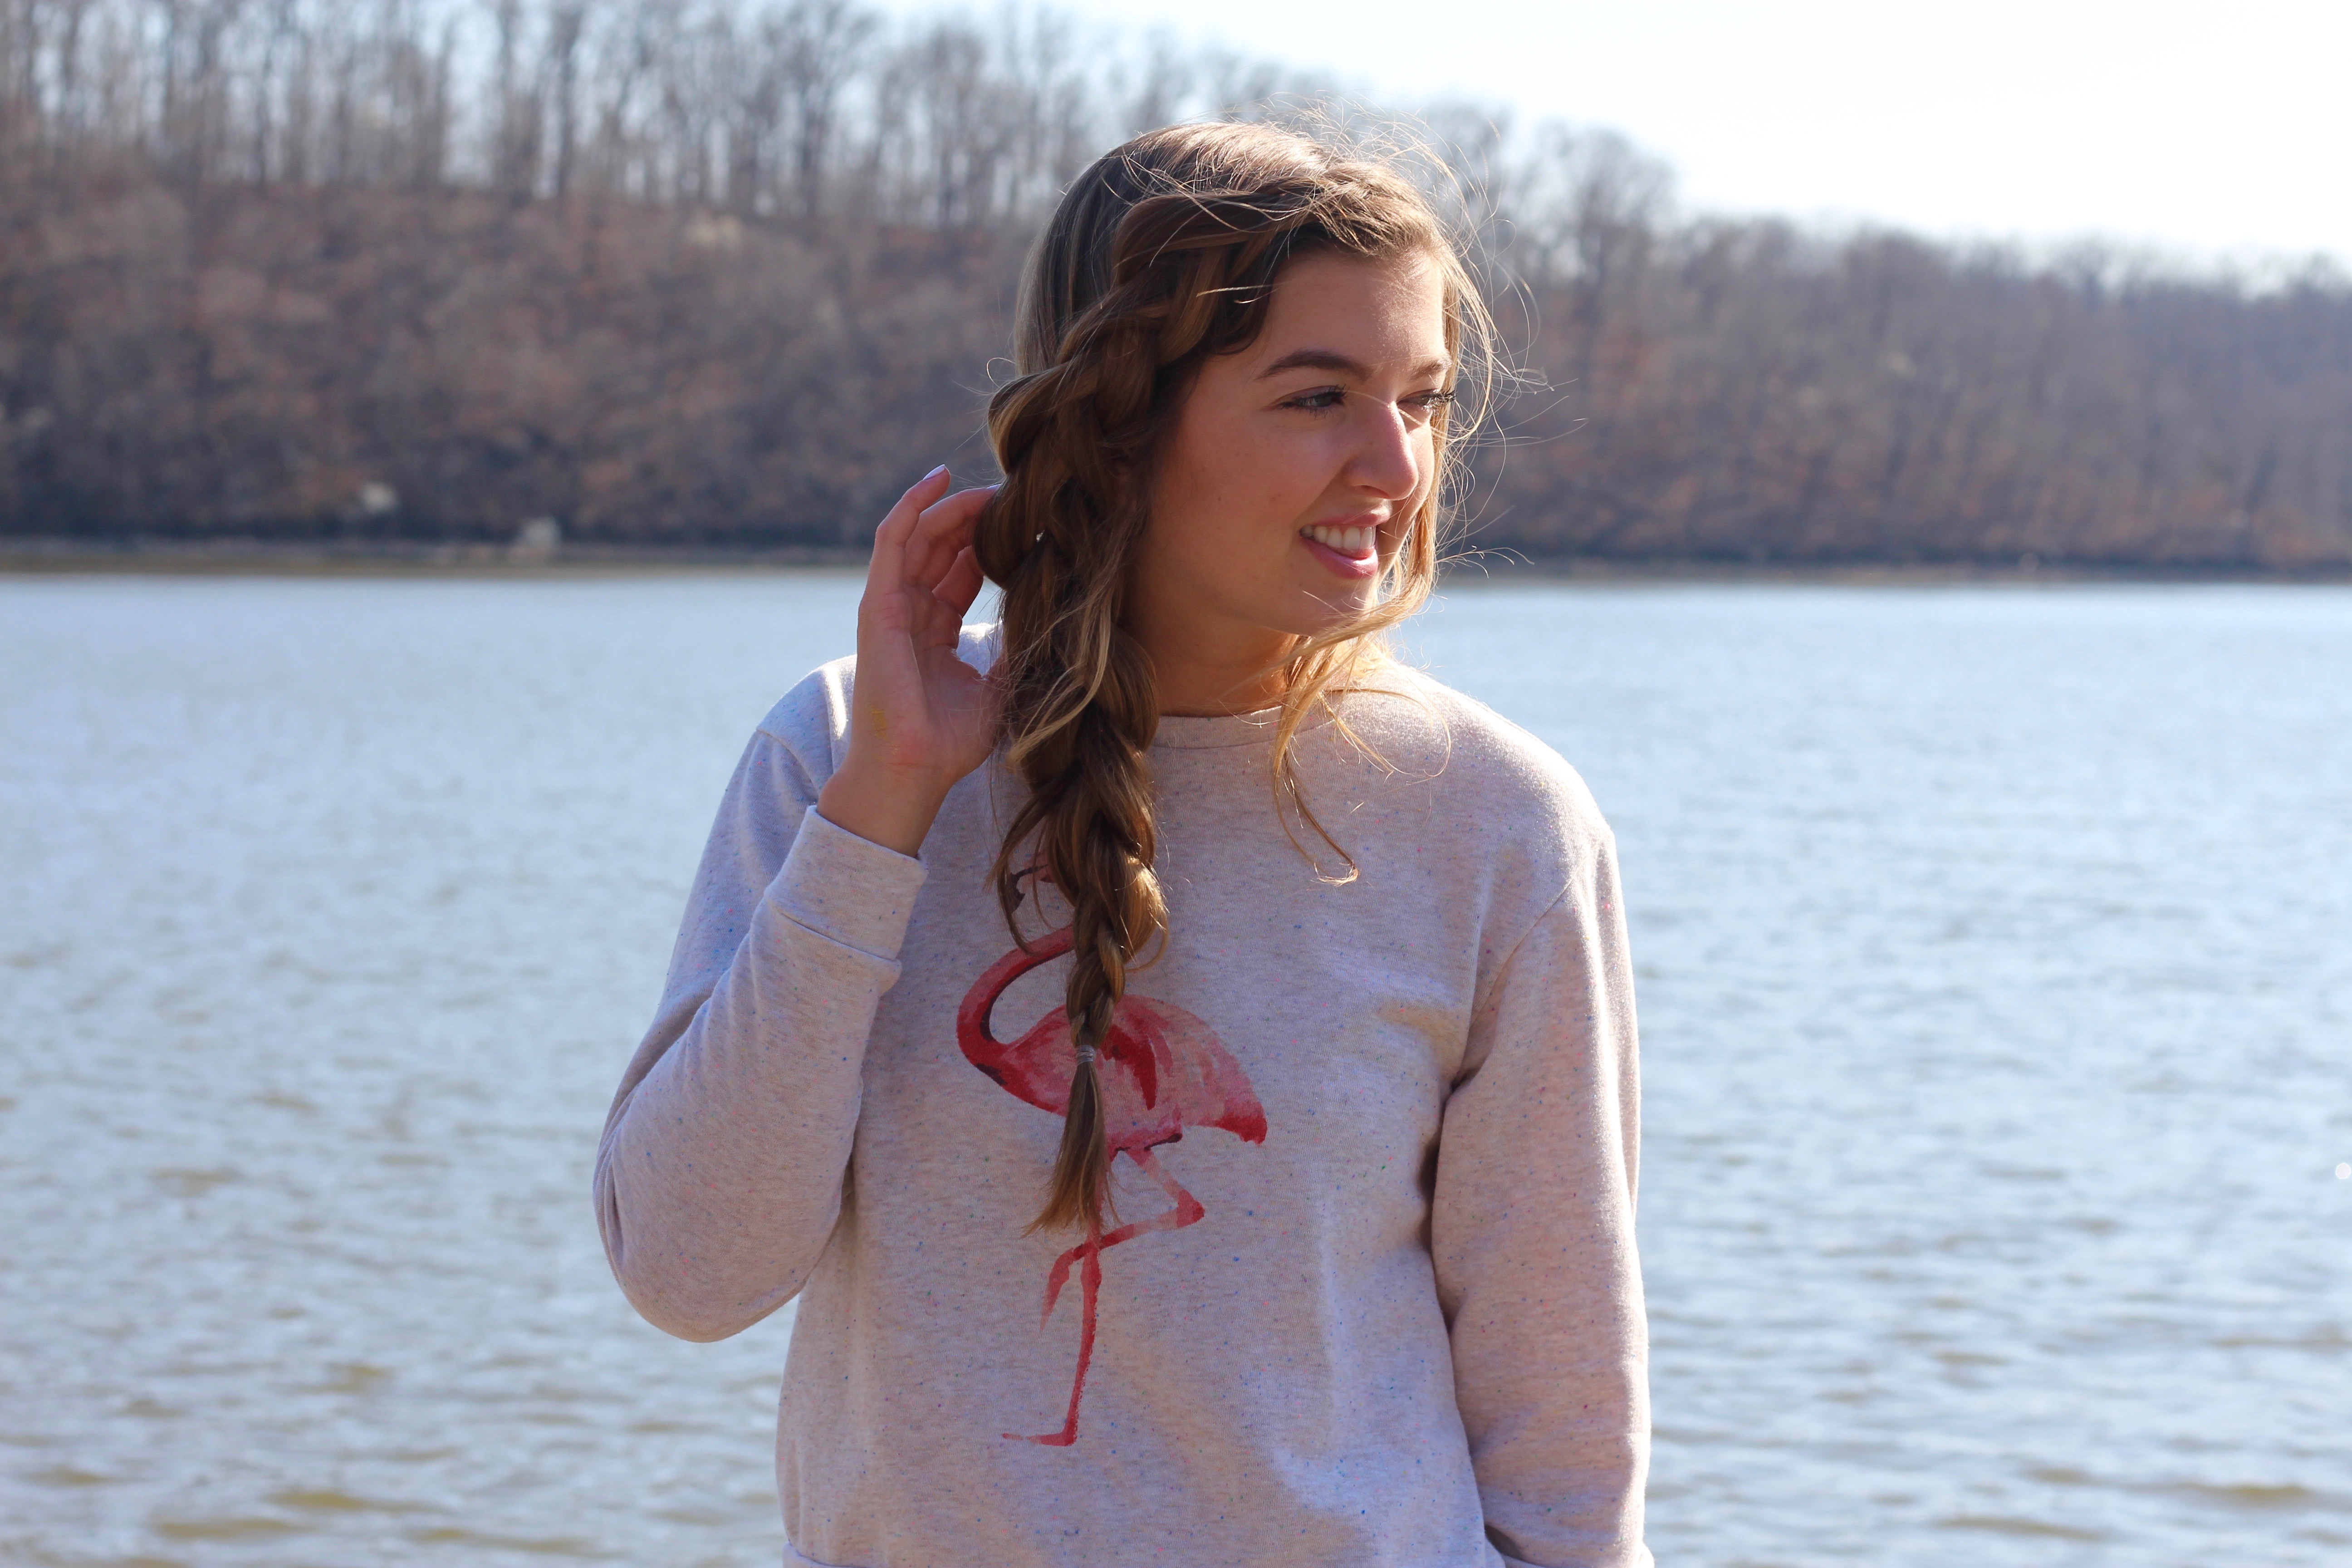 Easter Hair Blog | Side Dutch Braid No Heat Hairstyle (Lake Edition) by Lauren Lindmark on Daily Dose of Charm